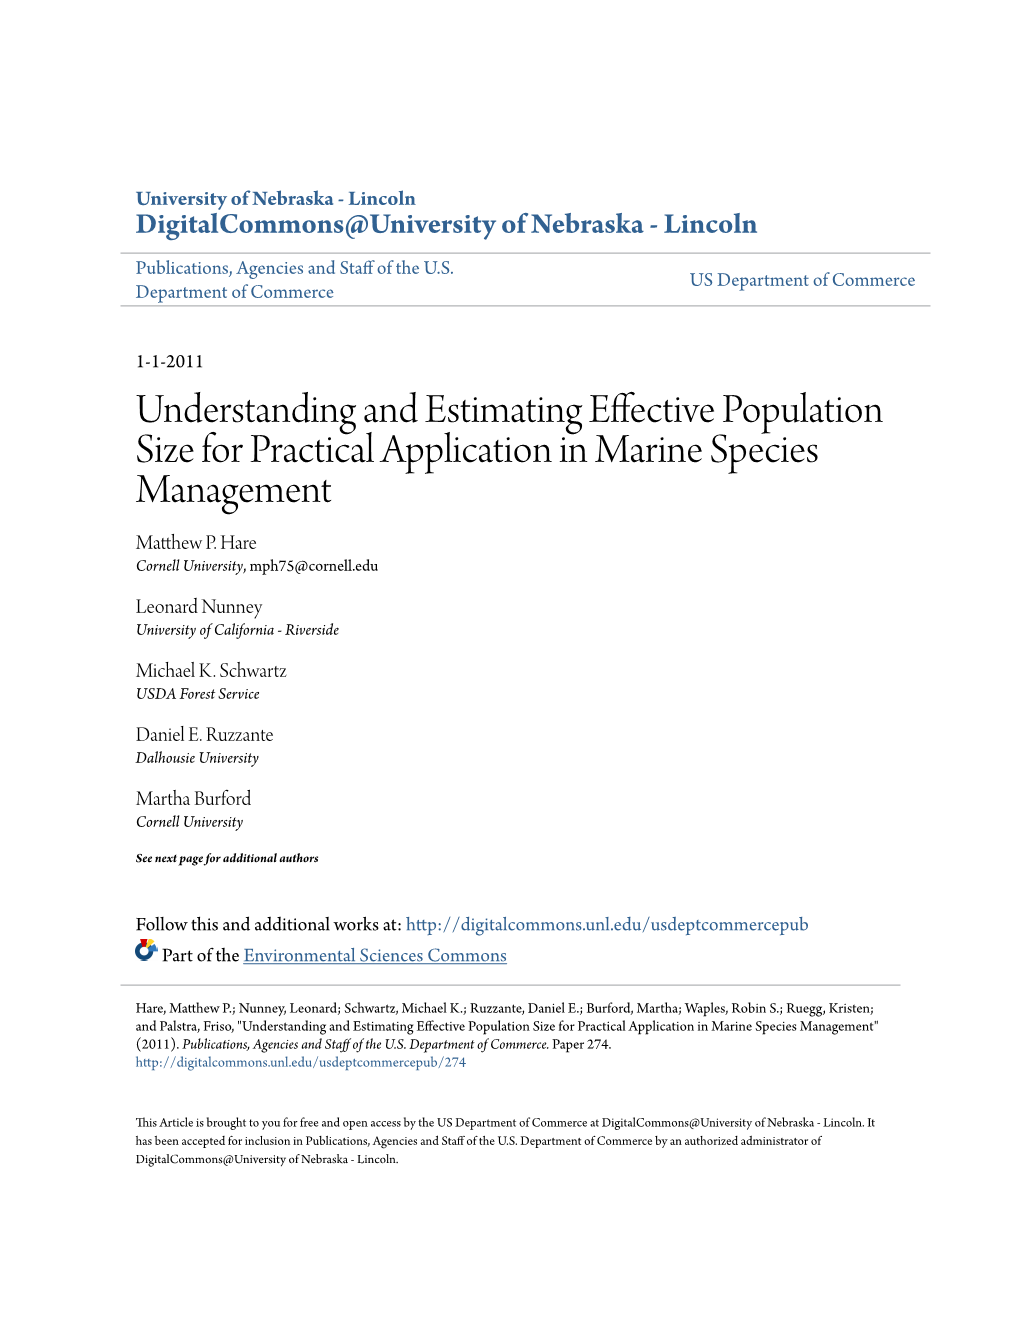 Understanding and Estimating Effective Population Size for Practical Application in Marine Species Management Matthew .P Hare Cornell University, Mph75@Cornell.Edu